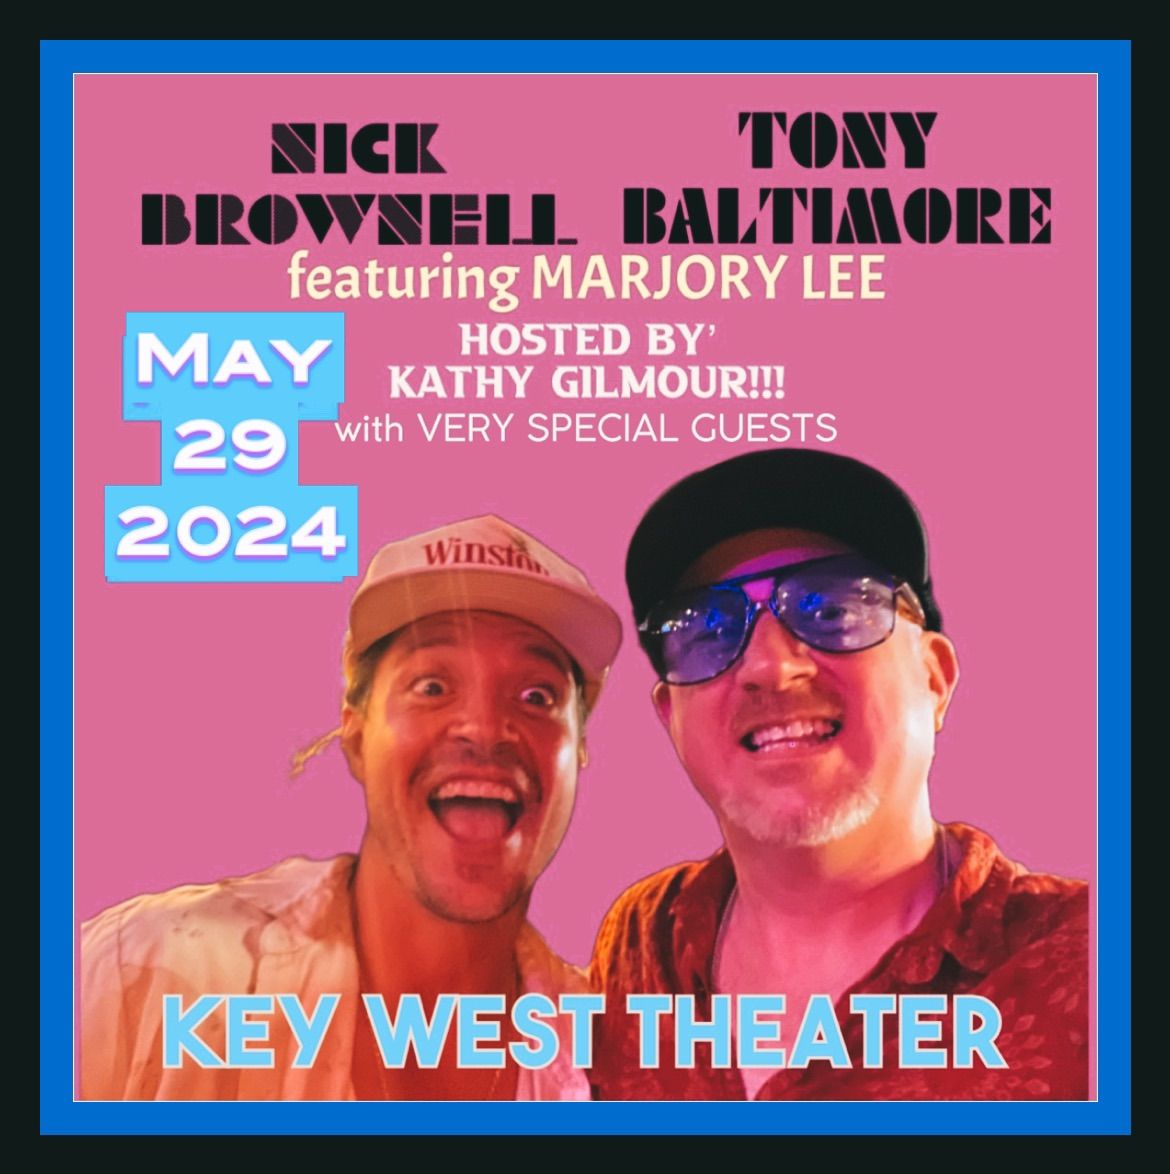 Tony Baltimore & Nick Brownell at the Key West Theater!